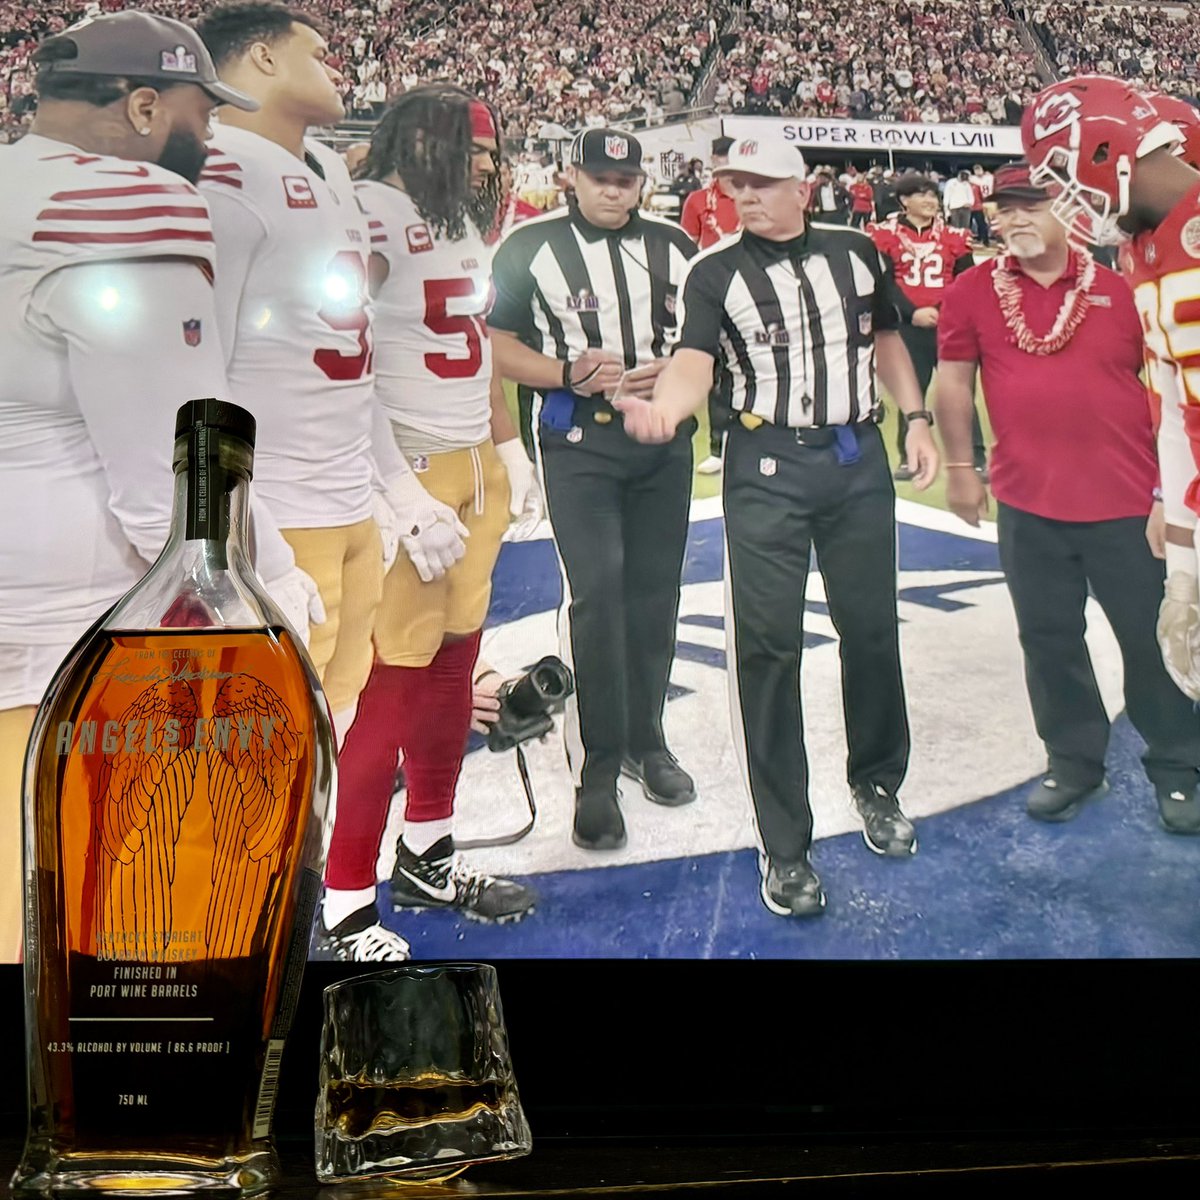 Watching the #SuperBowlLVIII with a bottle of @Angels_Envy that was gifted by the great mate @Oilersfann83. Go @49ers!